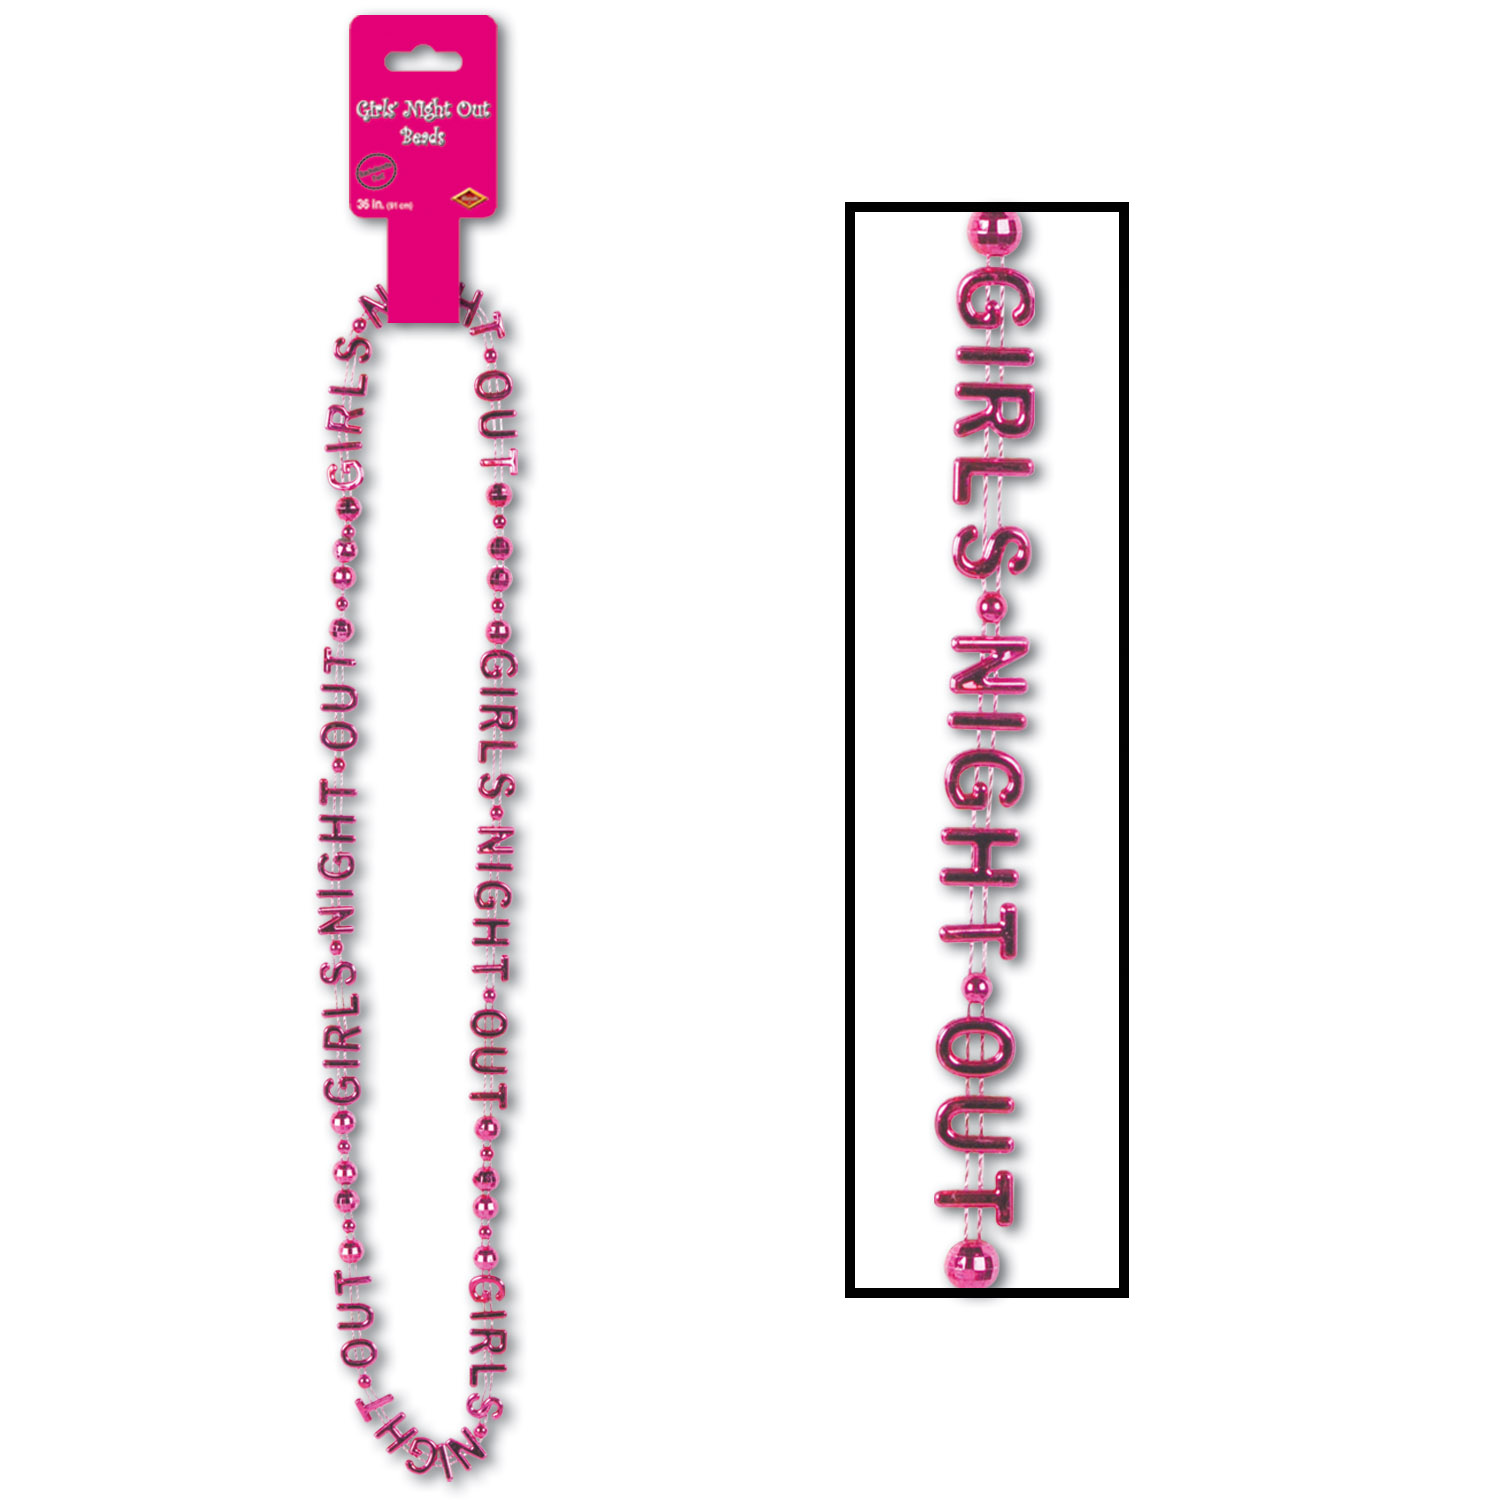 Girls' Night Out BEADS-Of-Expression